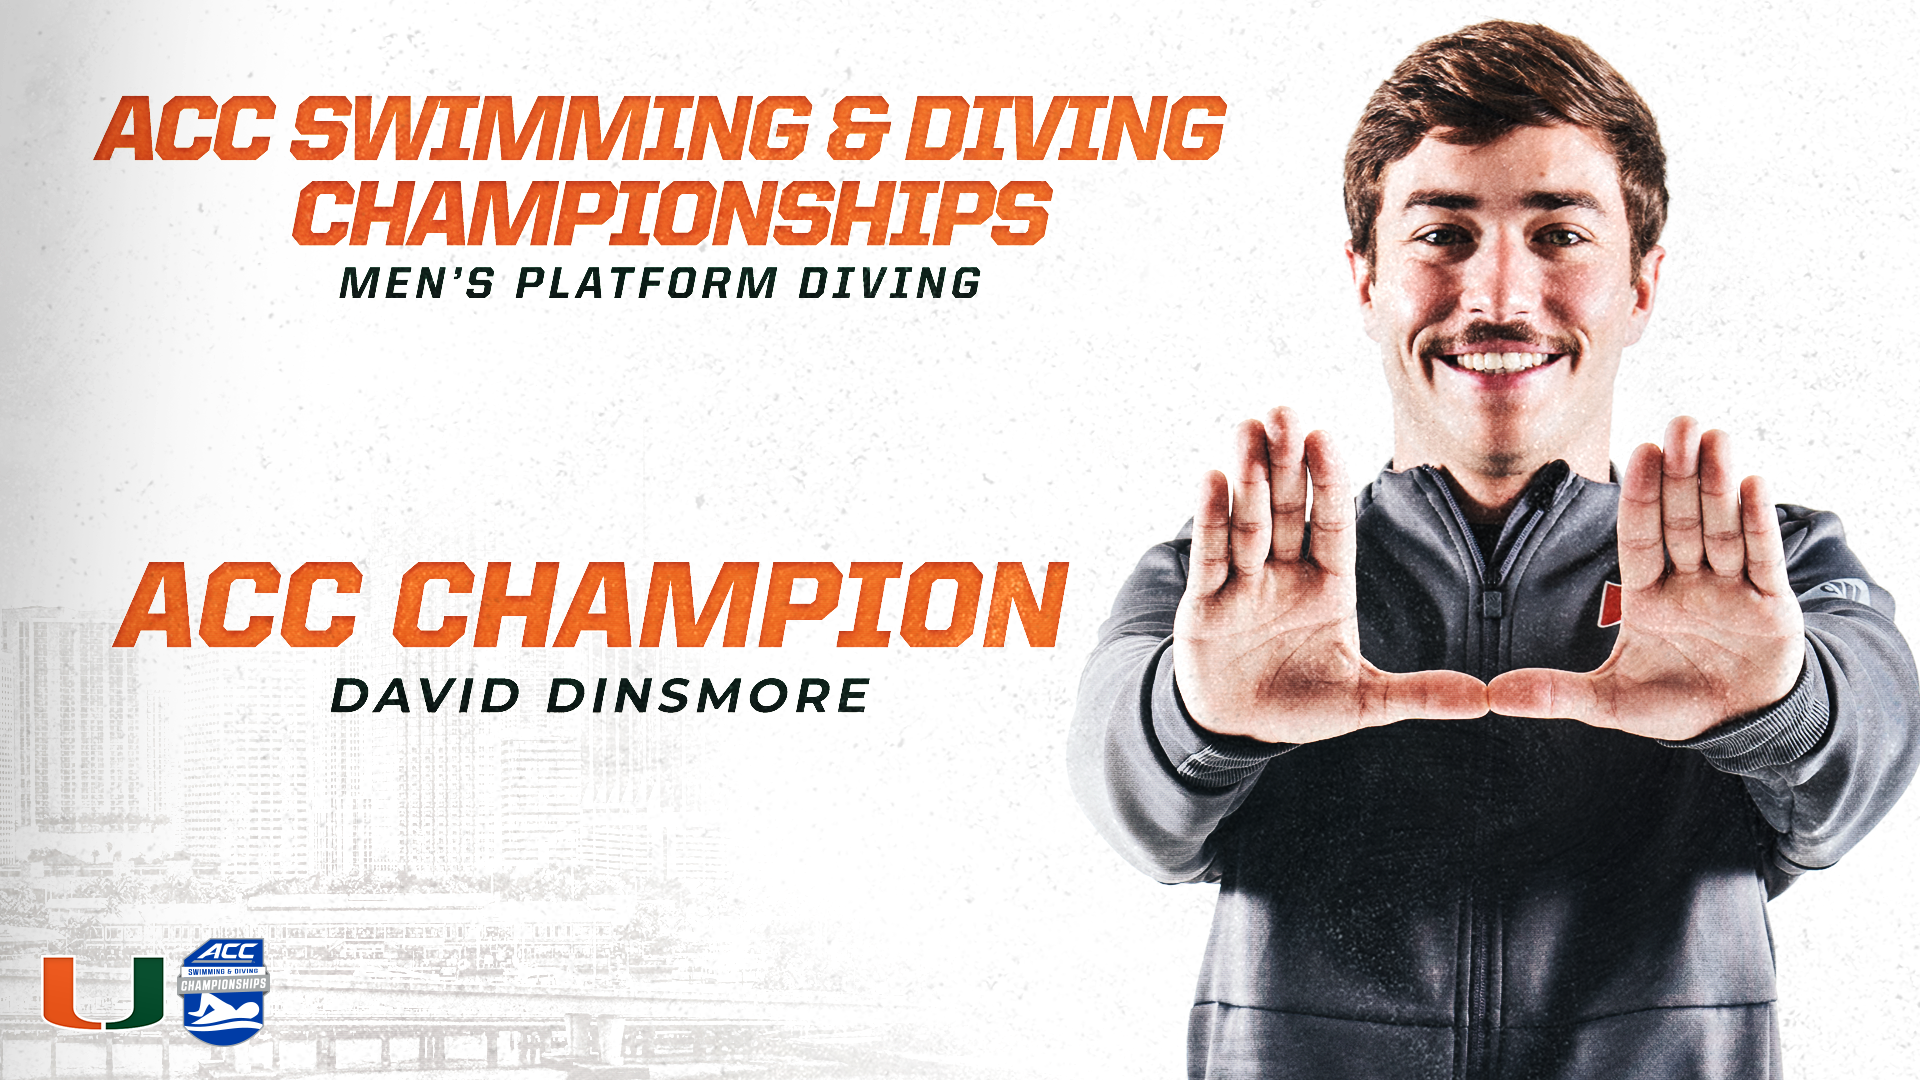 Dinsmore Wins Fourth Straight ACC Gold Medal